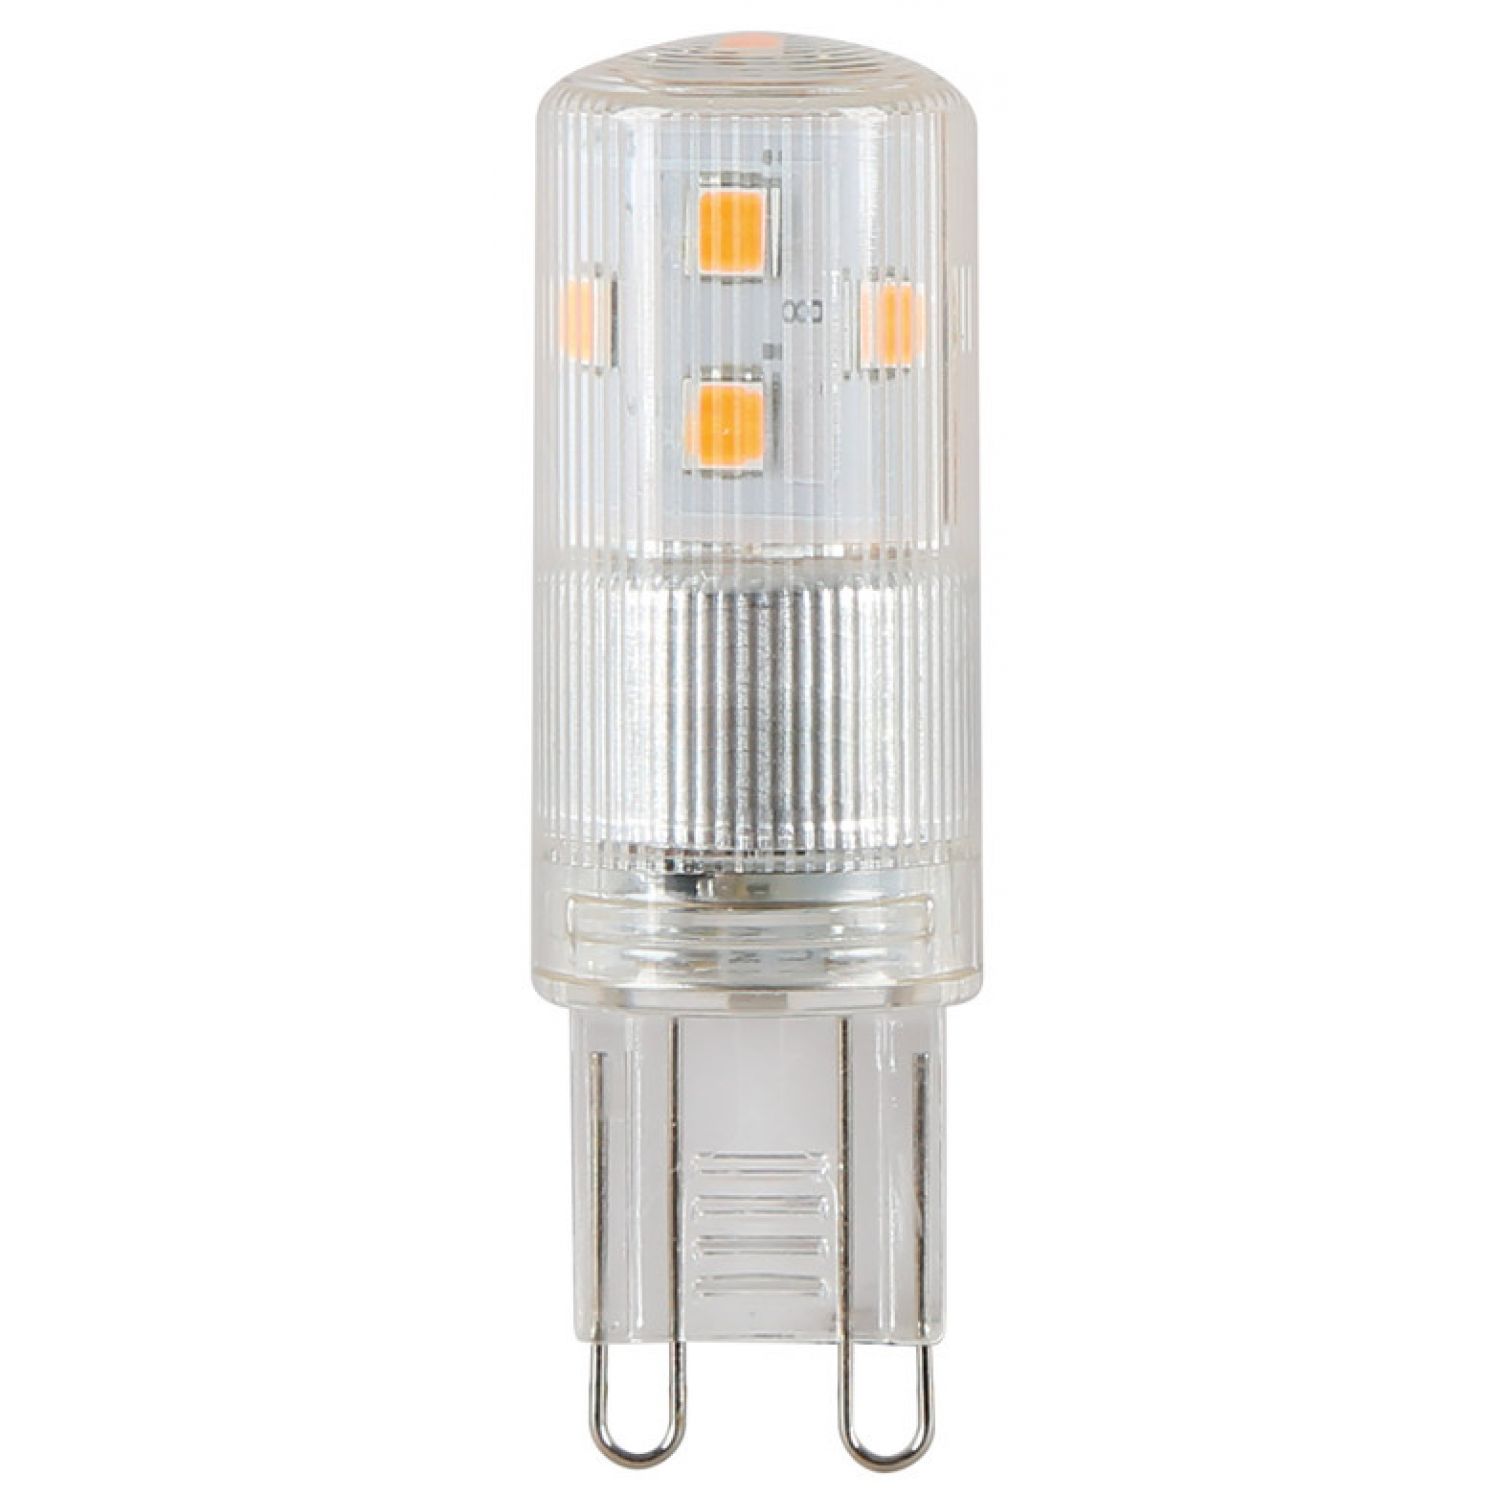 Eerlijkheid Overleven Melodieus Integral ILG9DC011: 3w LED G9 LED Capsule Bulb, 2700K, clear, dimmable,  300lm =28w - from £3.23